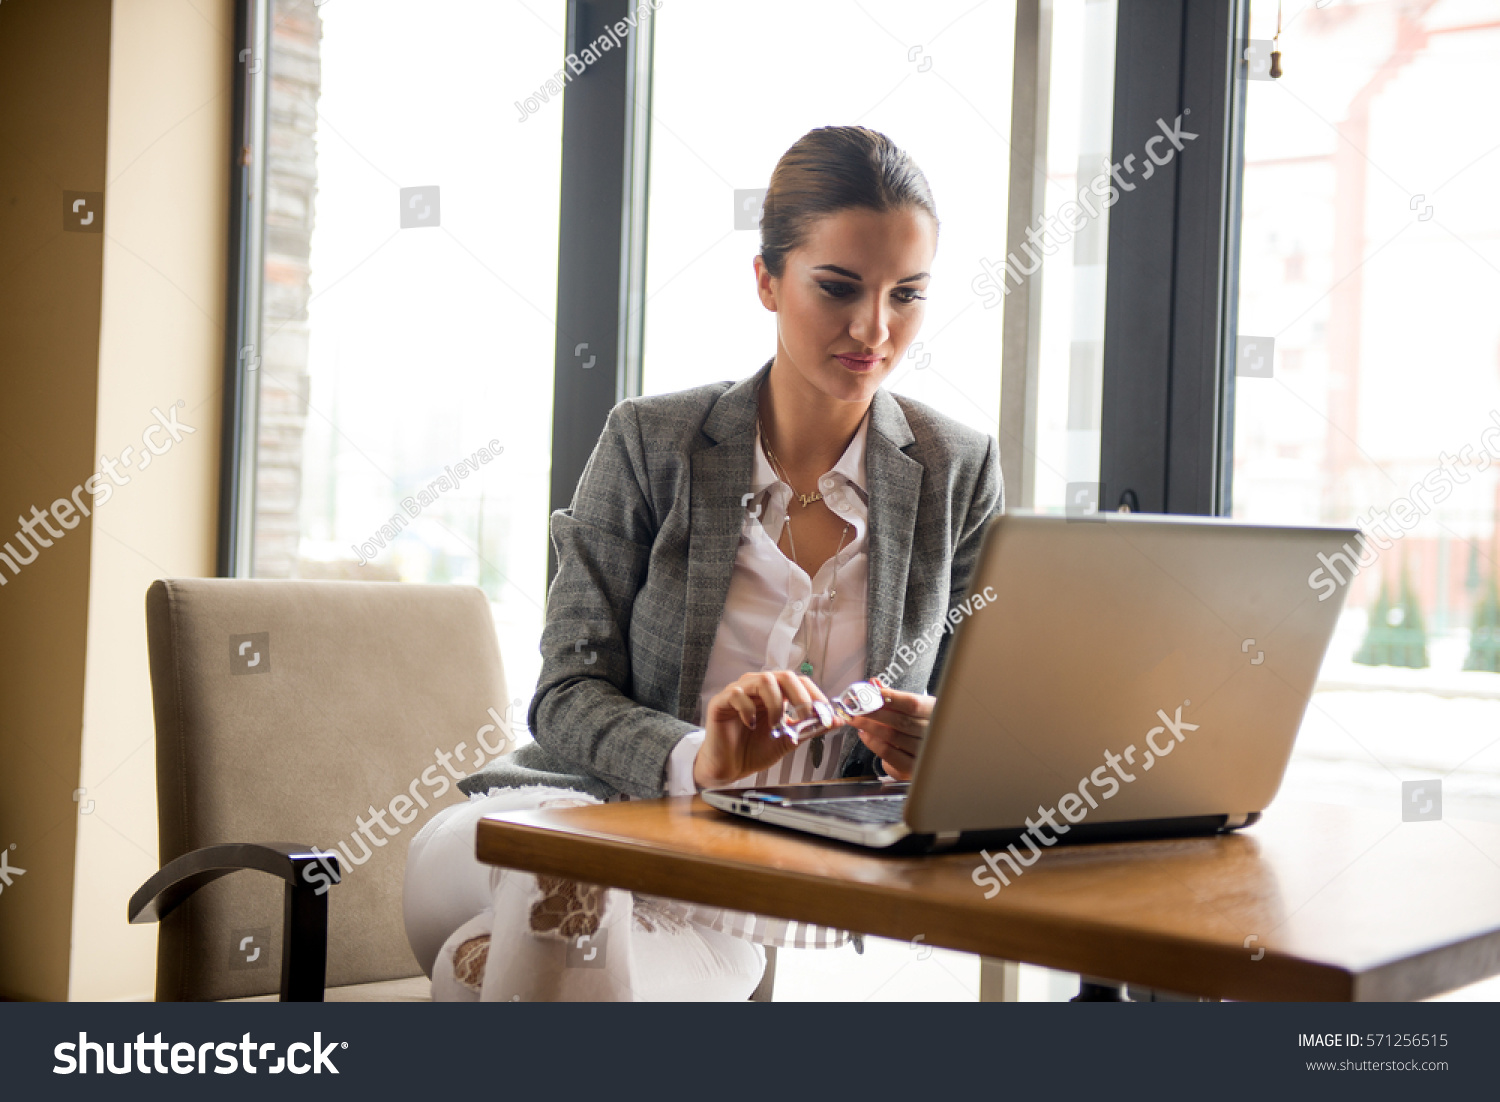 Bussineswoman with a glasses is working on computer, in a restaurant #571256515